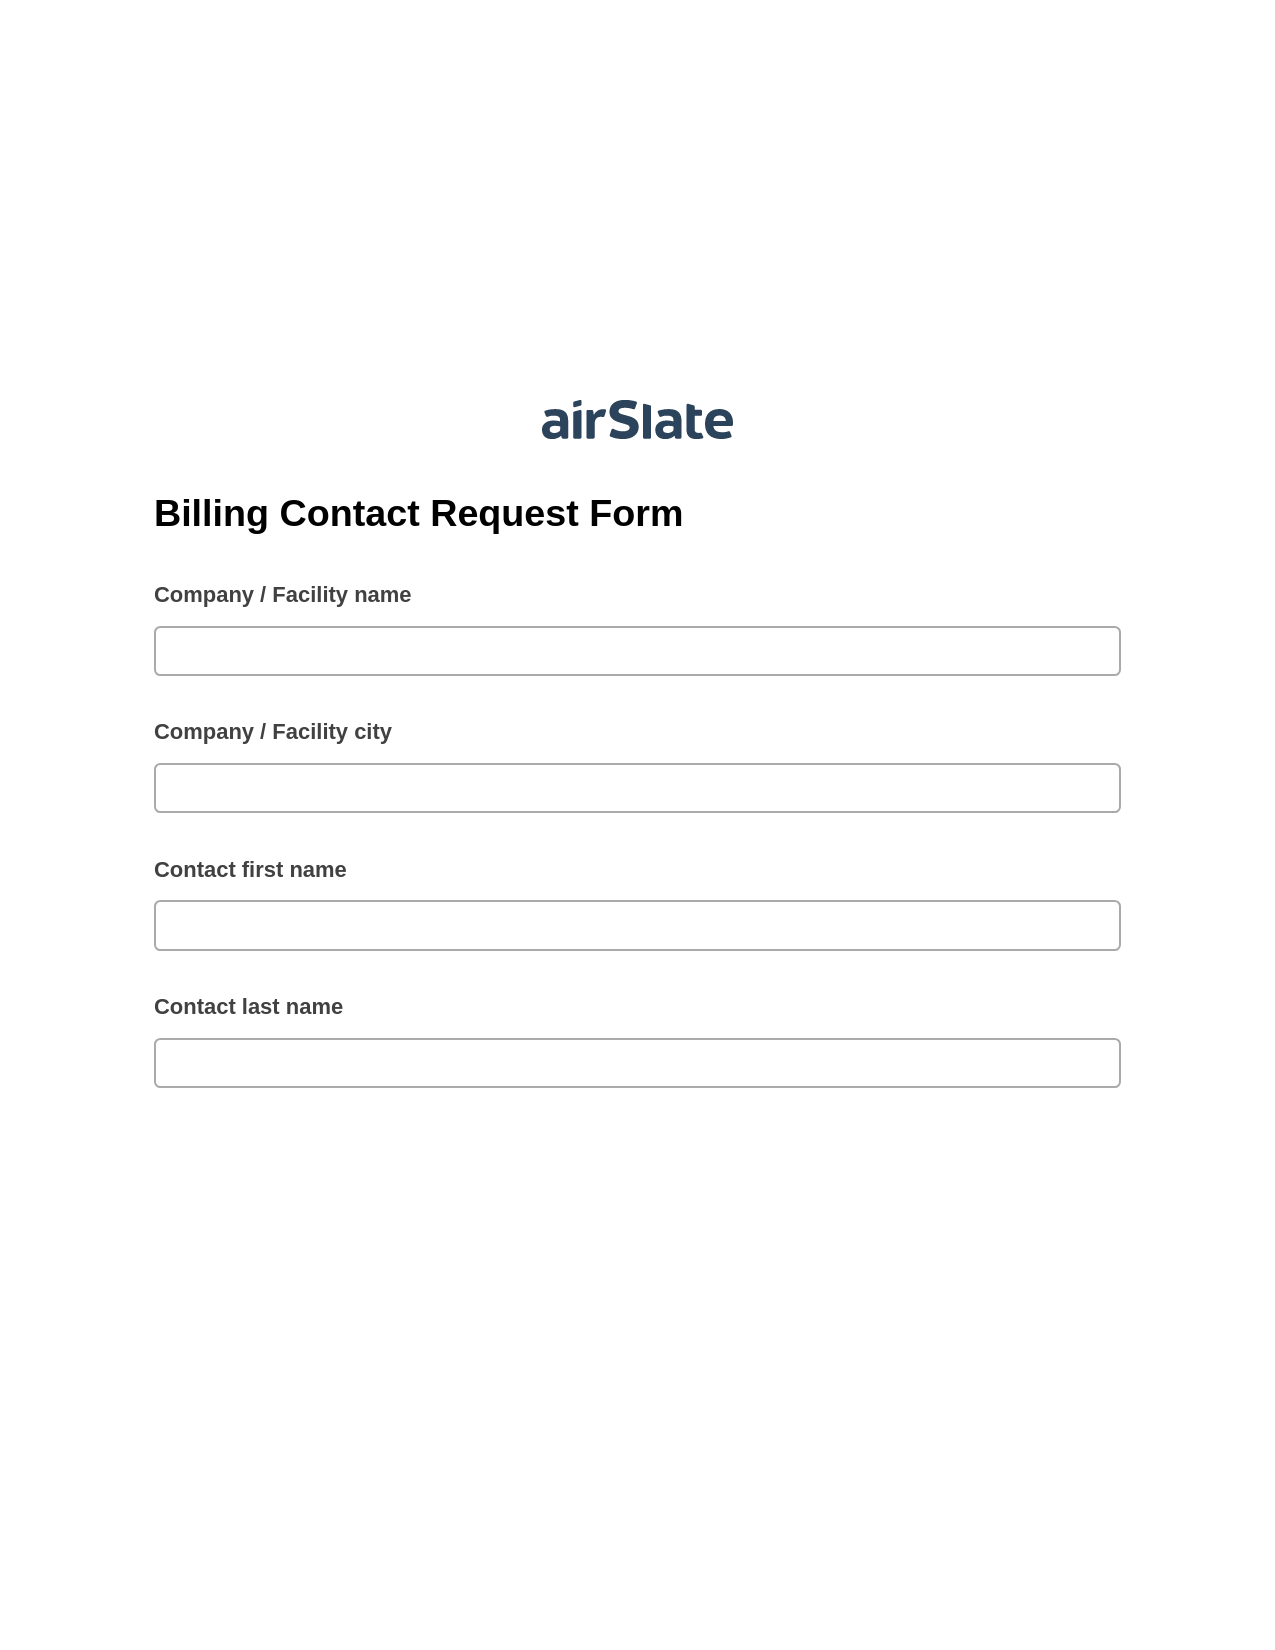 Multirole Billing Contact Request Form Pre-fill from NetSuite Records Bot, Hide Signatures Bot, Dropbox Bot